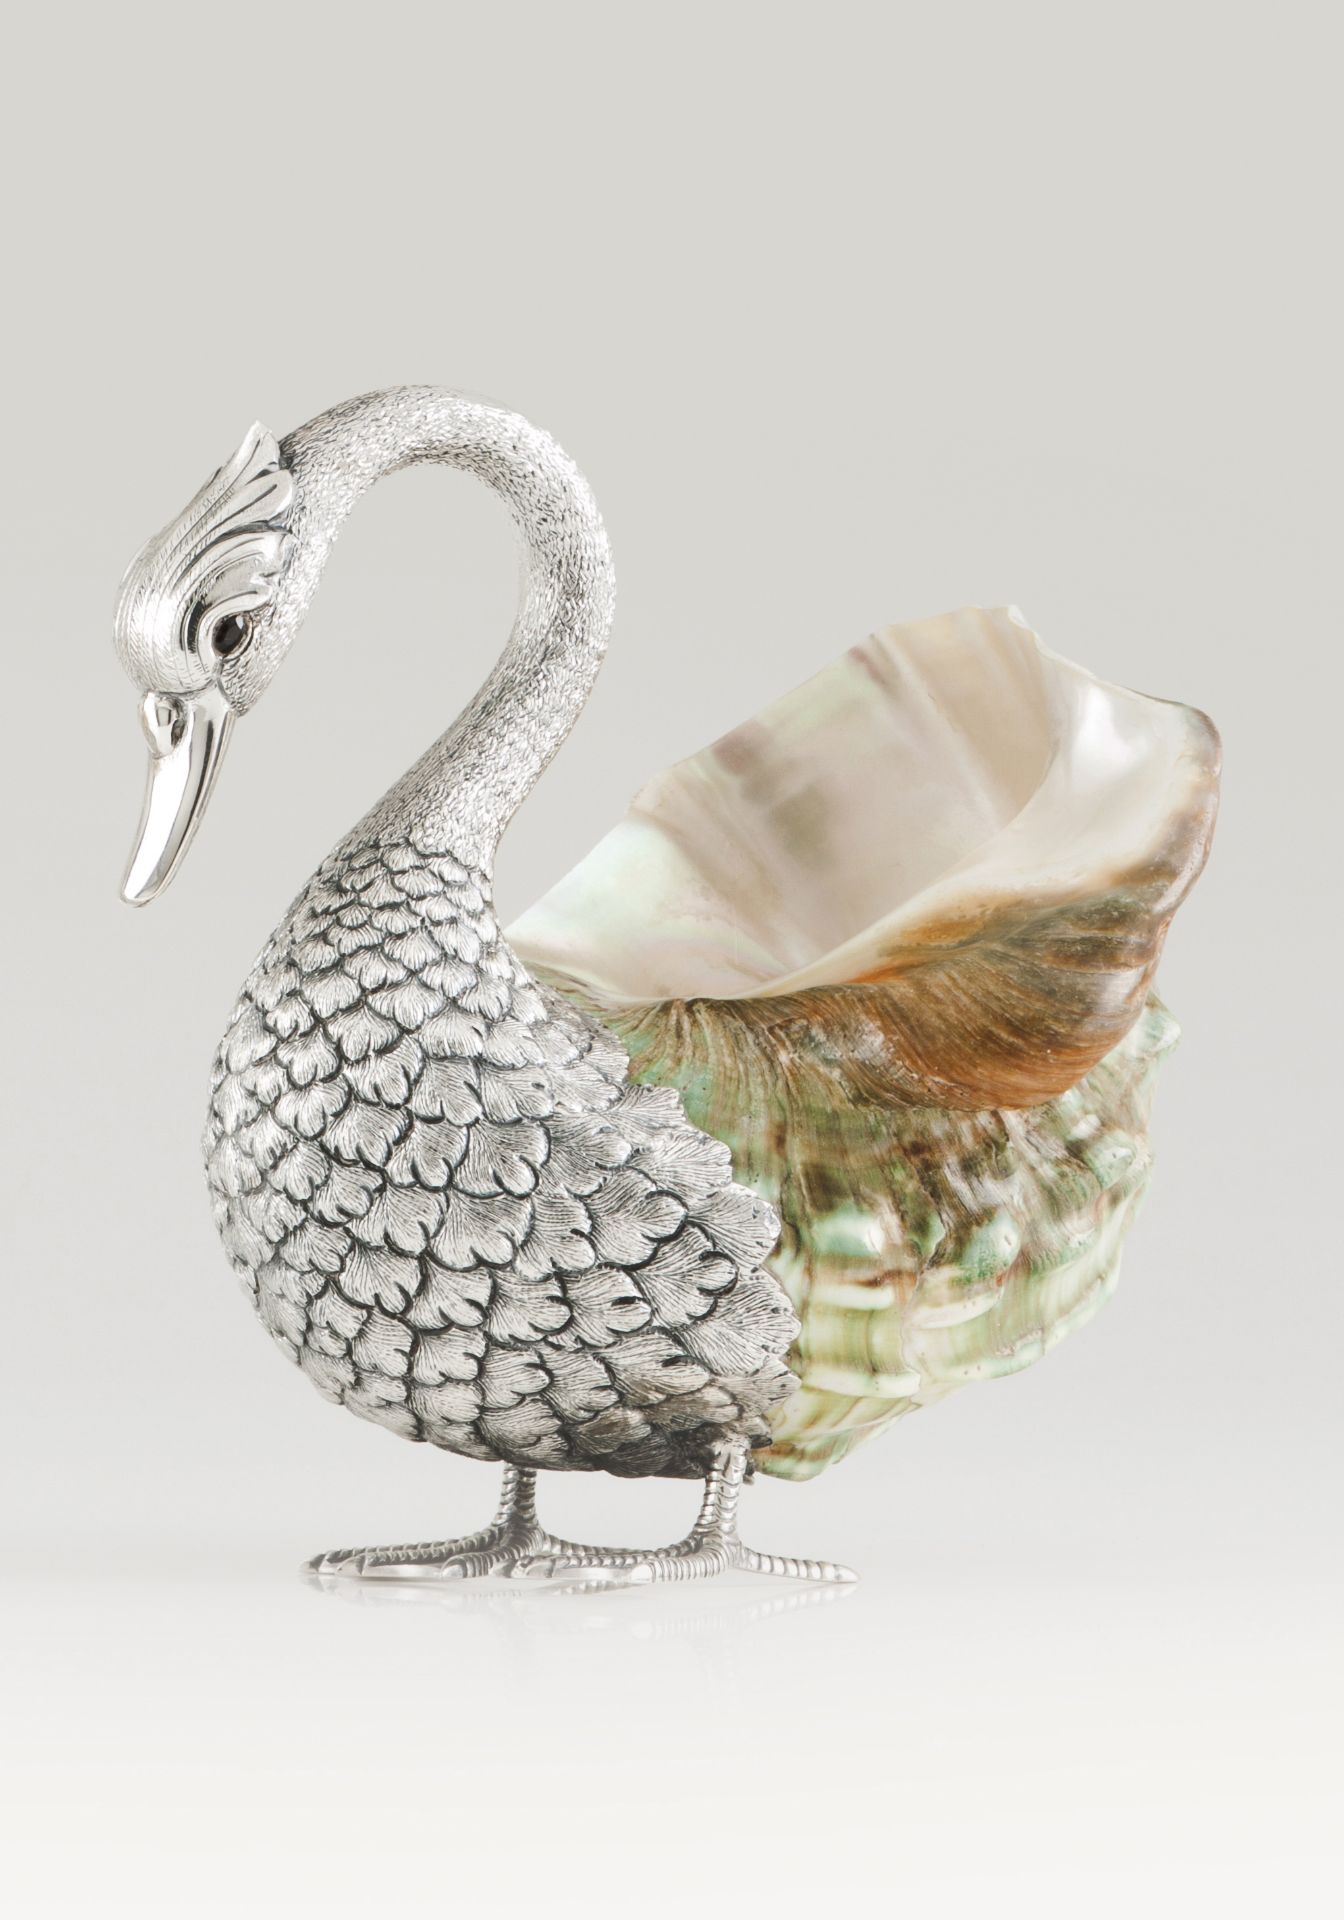 A pair of ducksA shell and portuguese silver sculpture representing a standing duckPorto assay